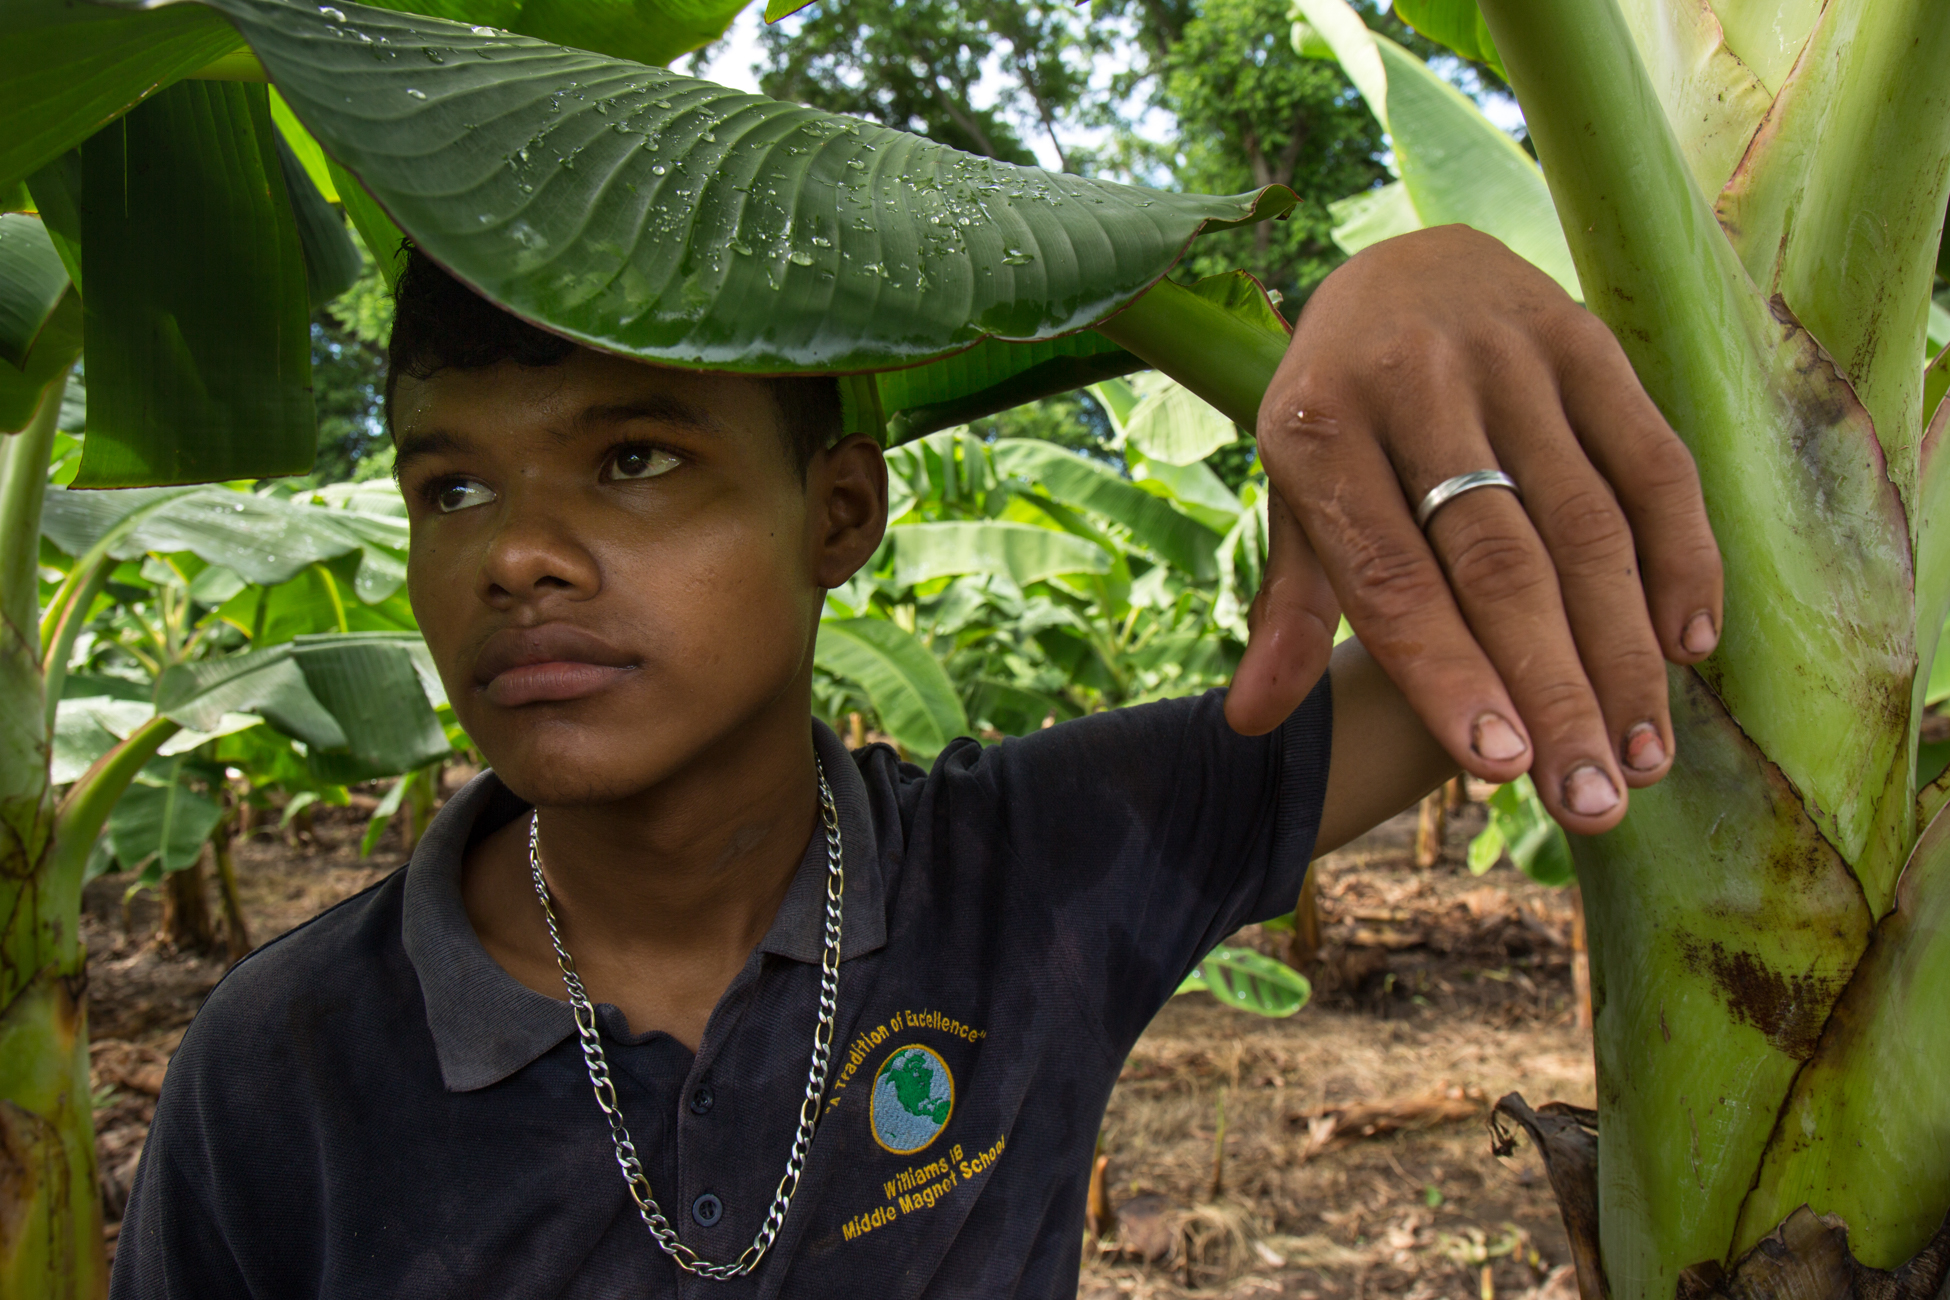  Eliezer Jose Ugoster, 16, at his father's plantain plantation, in Santa Teresa, Ometepe. Their land is under threat to be confiscated by the governemnt if the Grand Canal project goes through.&nbsp; 